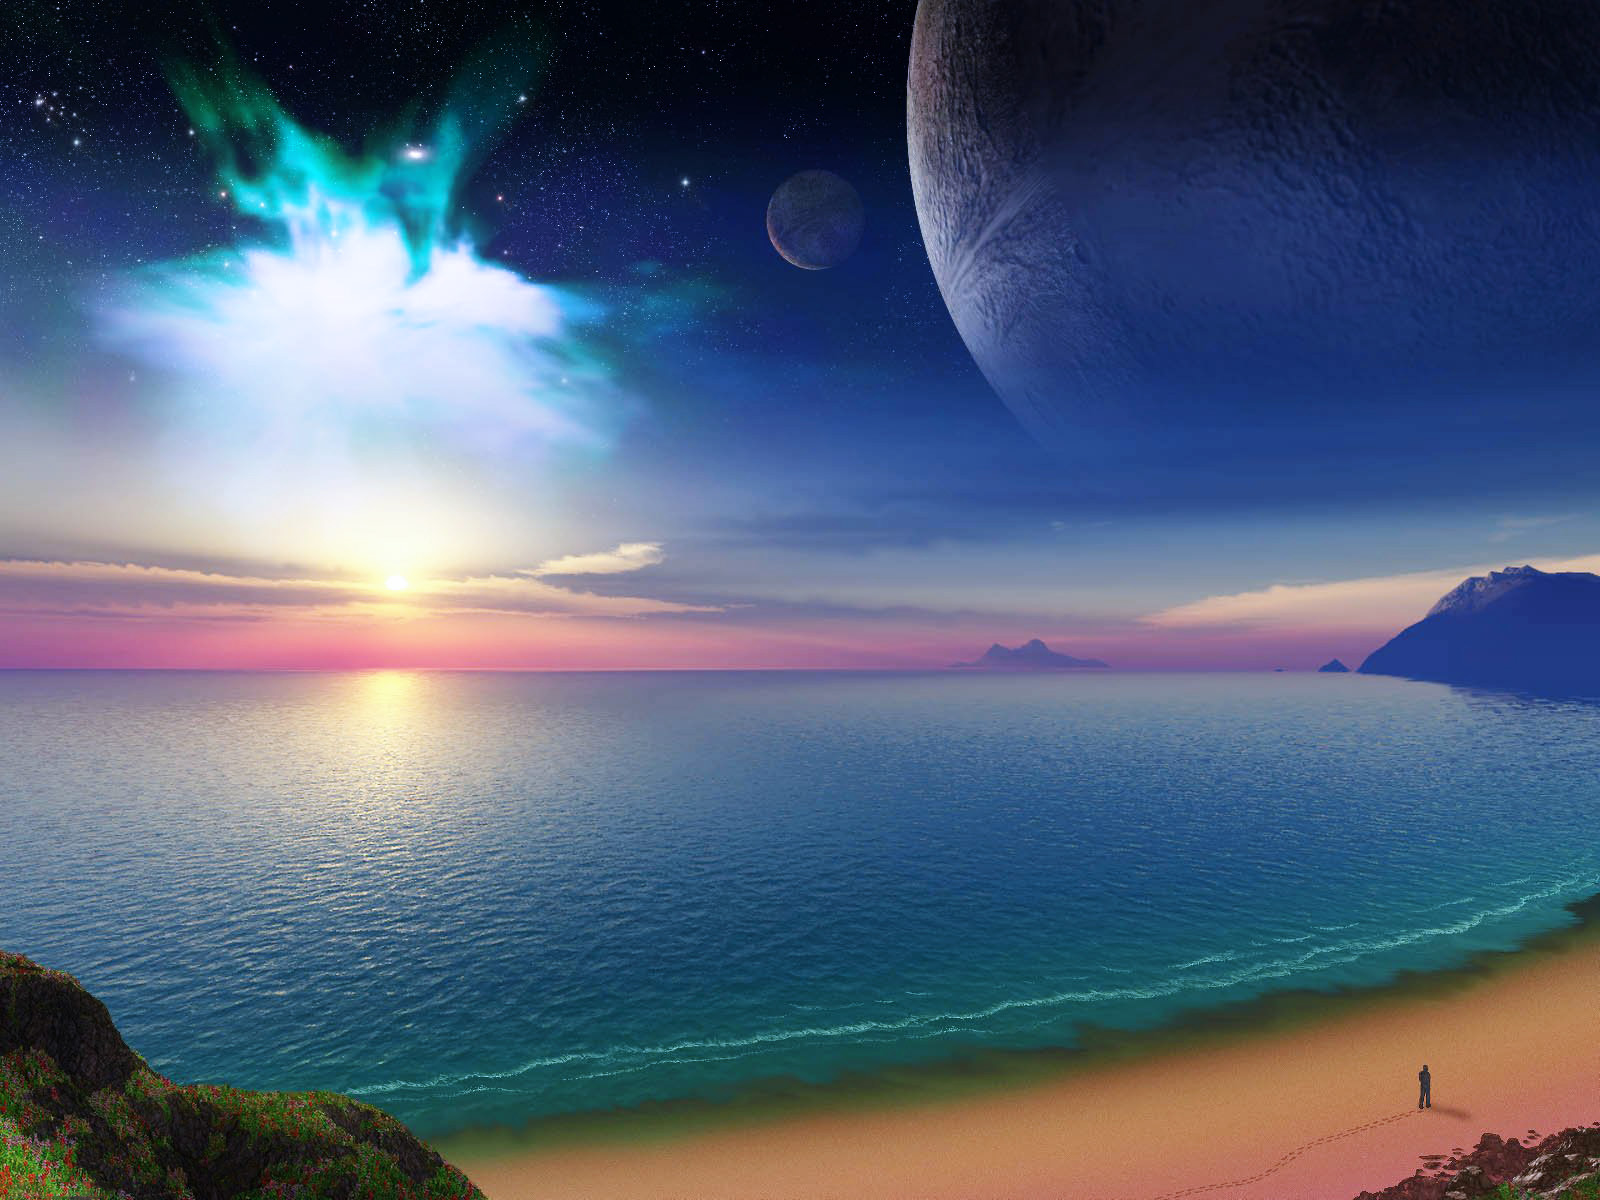 Fantasy ocean beach with a glowing sun and planet.